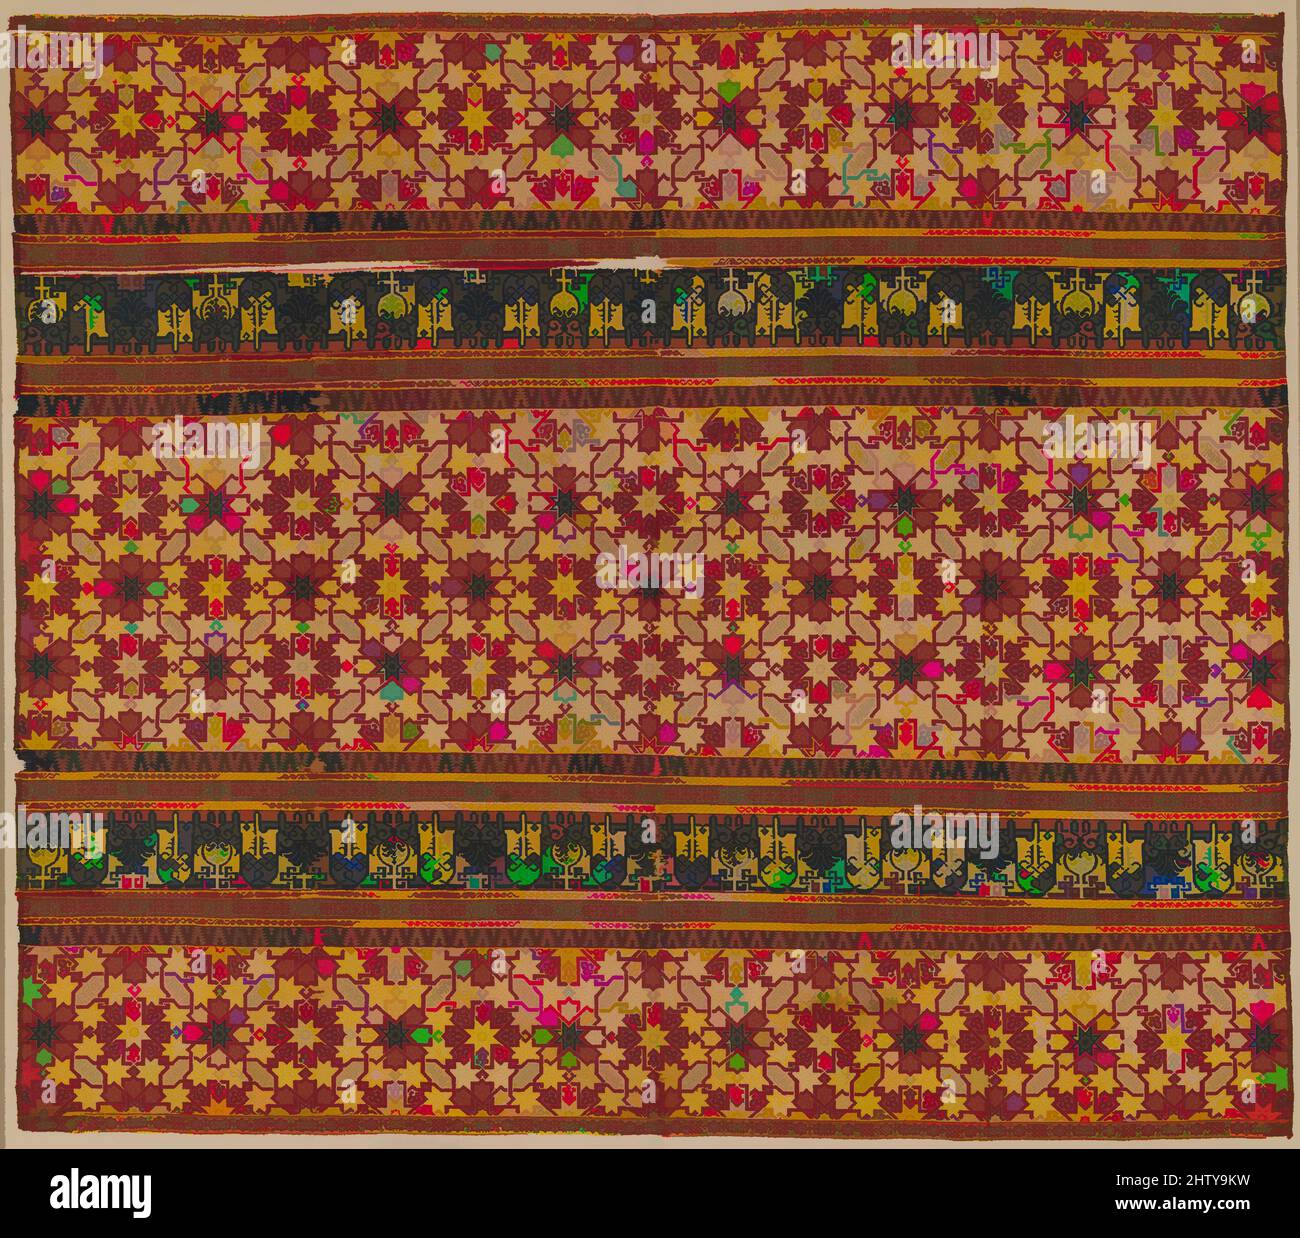 Art inspired by Textile Fragment, 14th–15th century, Attributed to Spain or North Africa, Silk; lampas, Textile: H. 29 3/4 in. (75.6 cm), Textiles-Woven, Geometric compositions predominate silk textiles of Nasrid Spain (1232–1492) and the contemporaneous Marinid Dynasty (1269–1465) of, Classic works modernized by Artotop with a splash of modernity. Shapes, color and value, eye-catching visual impact on art. Emotions through freedom of artworks in a contemporary way. A timeless message pursuing a wildly creative new direction. Artists turning to the digital medium and creating the Artotop NFT Stock Photo